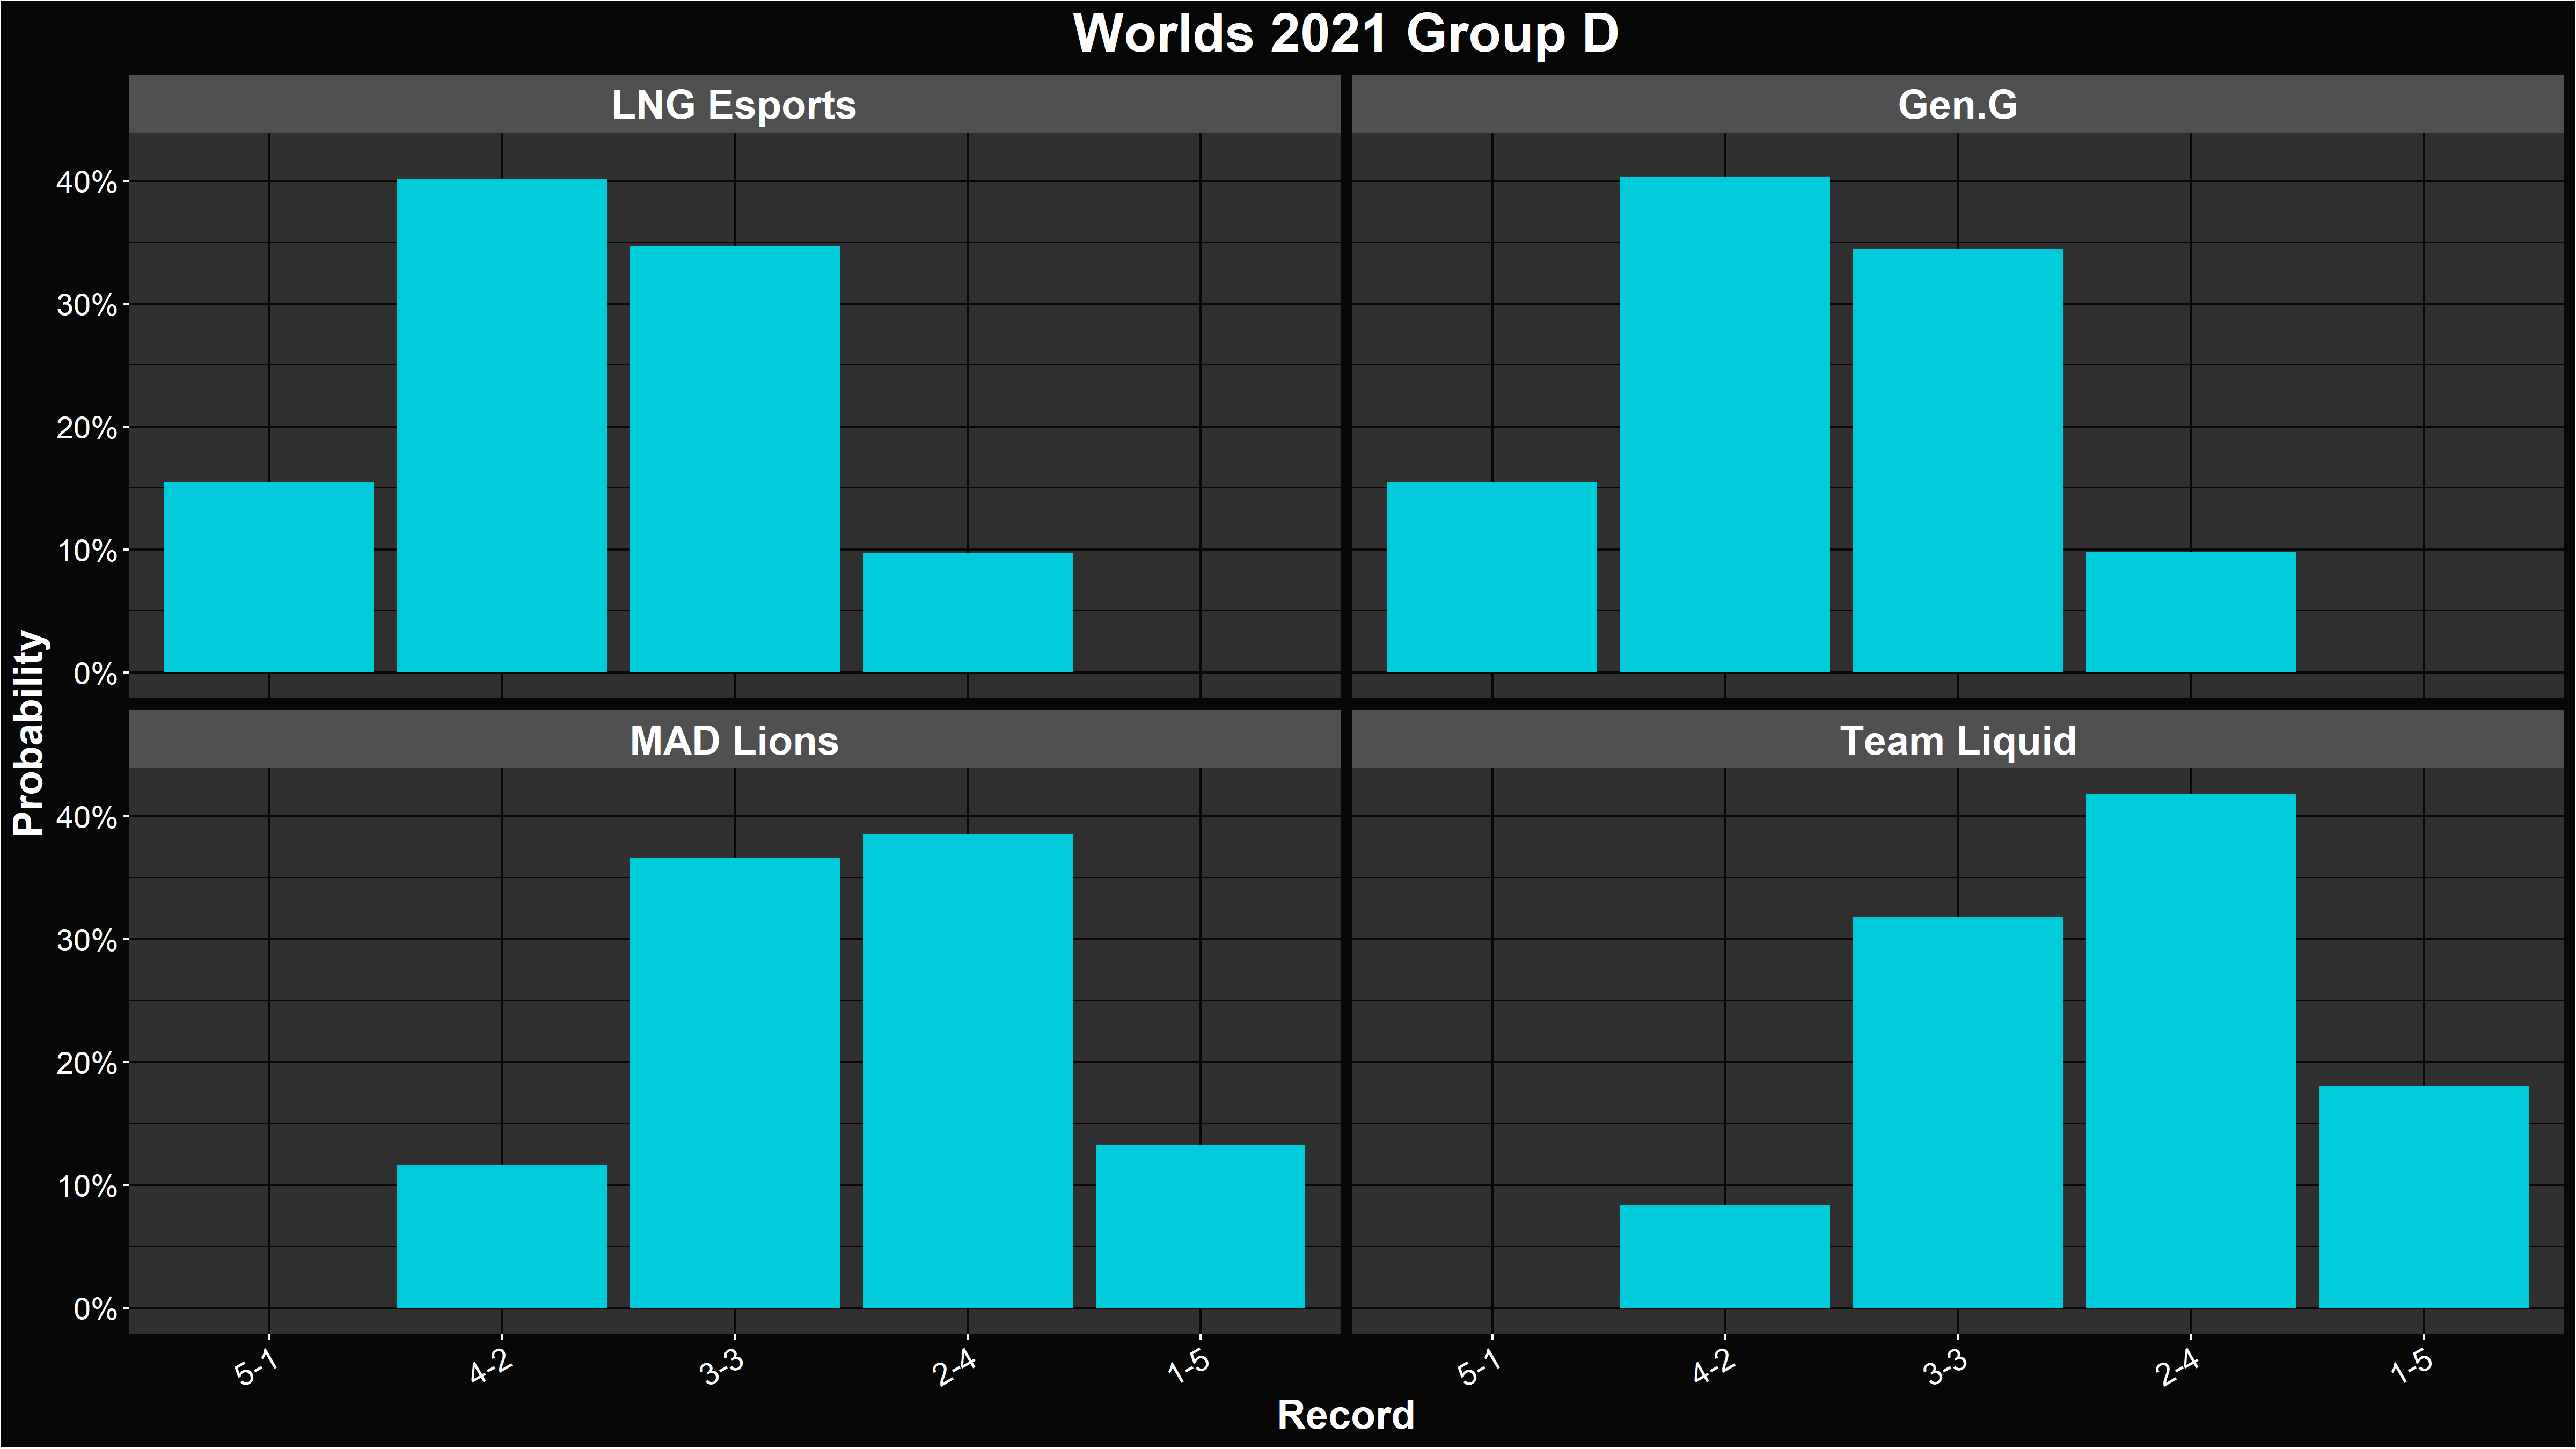 Alacrity's LoL Worlds 2021 Group D Record Distributions